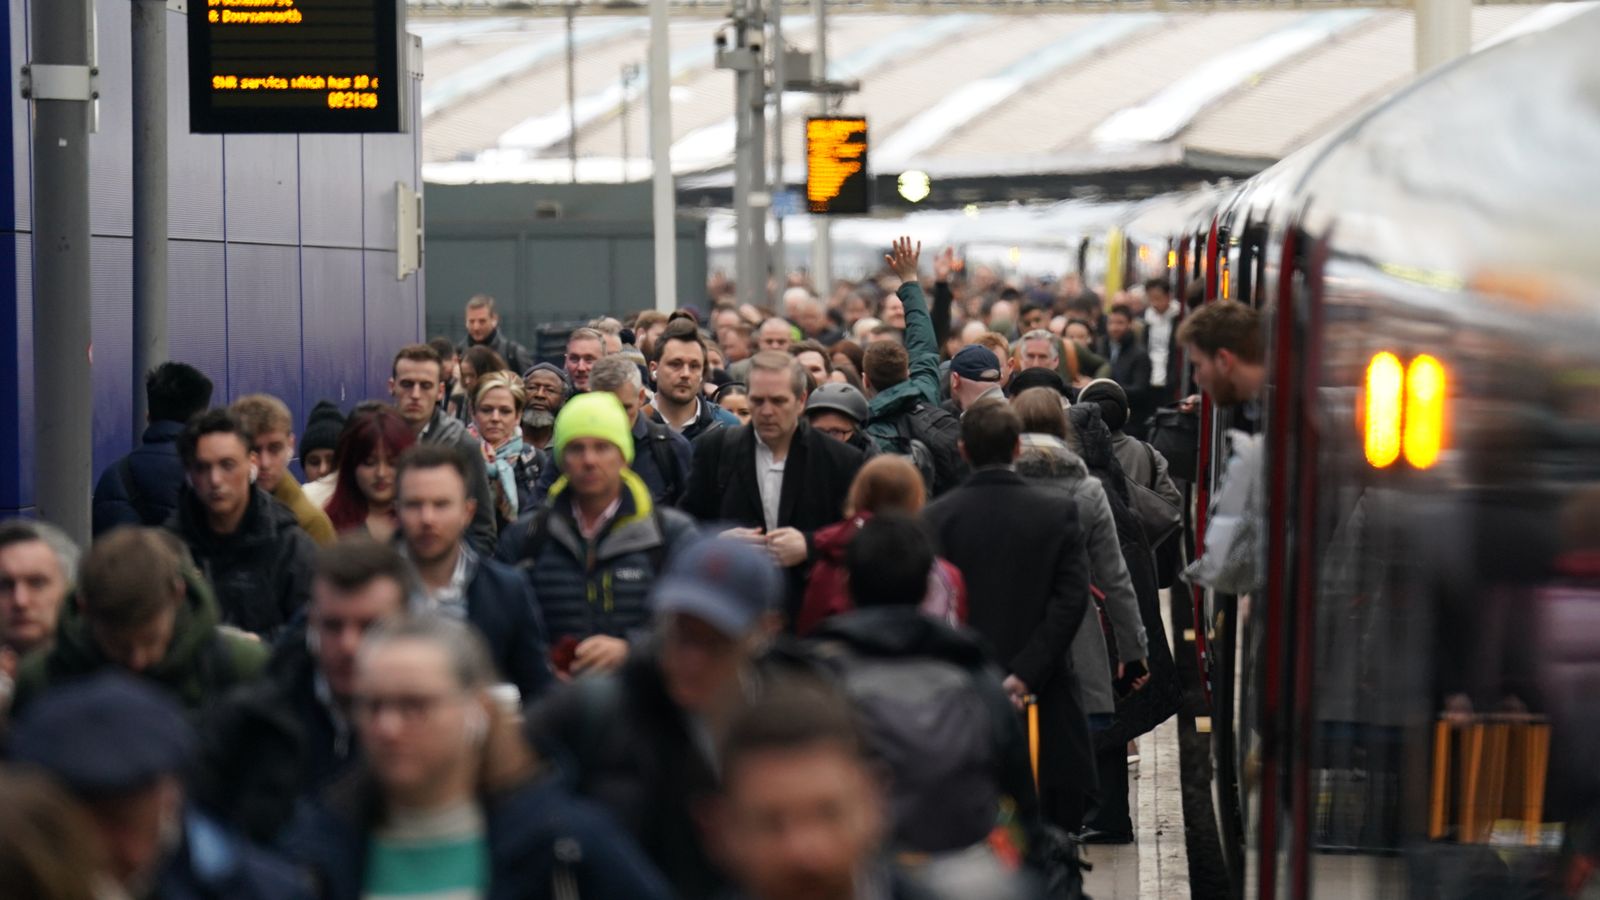 Rail fare hikes 'punish' passengers struggling with cost-of-living